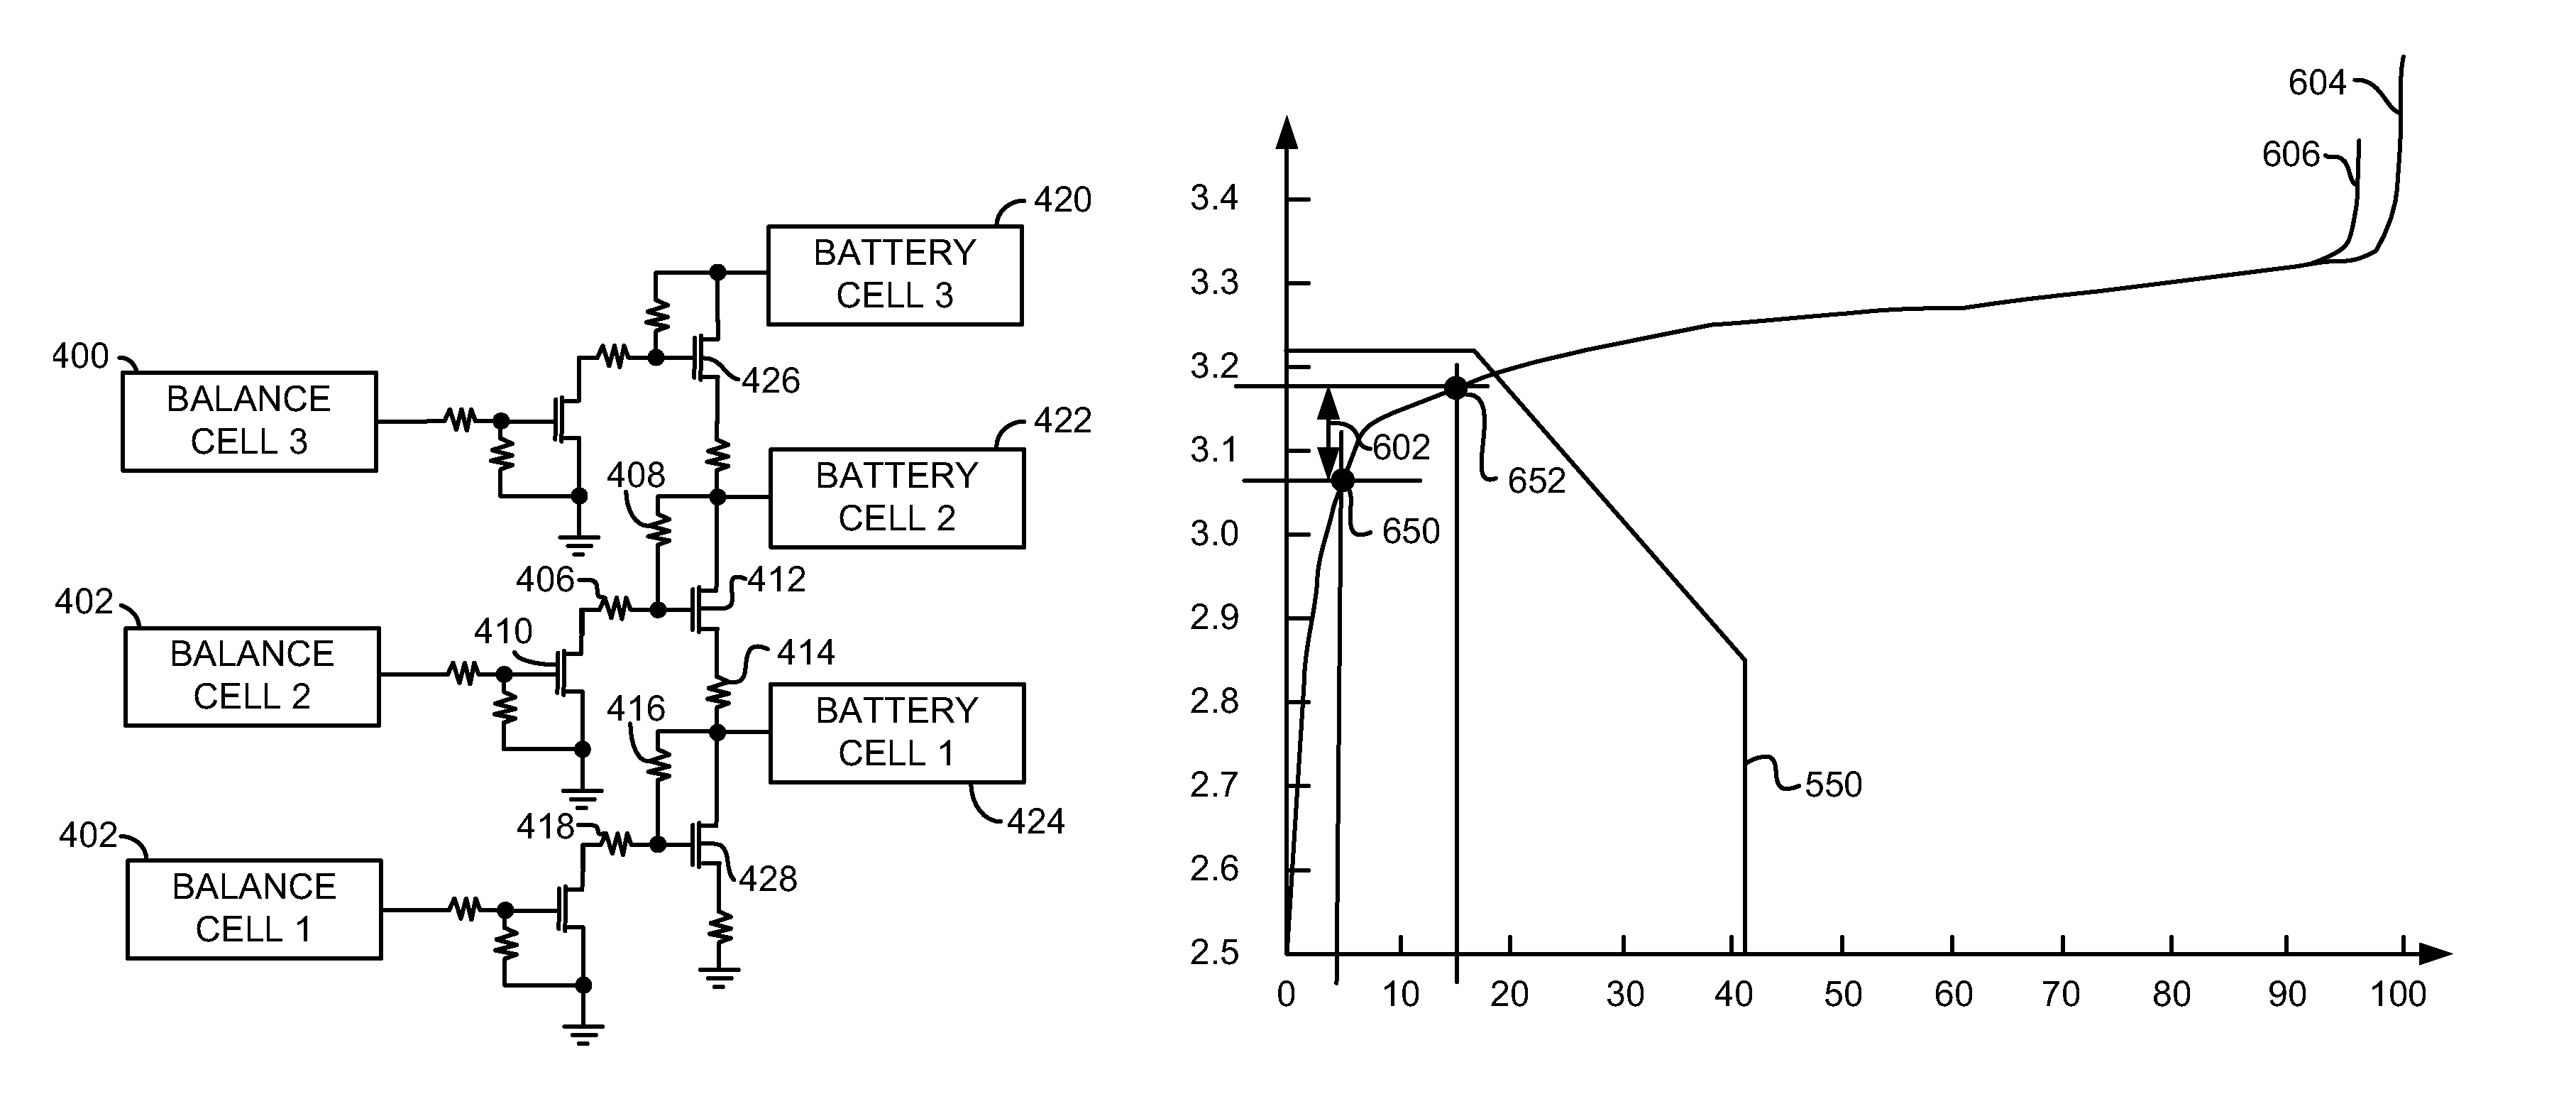 Method for opportunistically balancing charge between battery cells